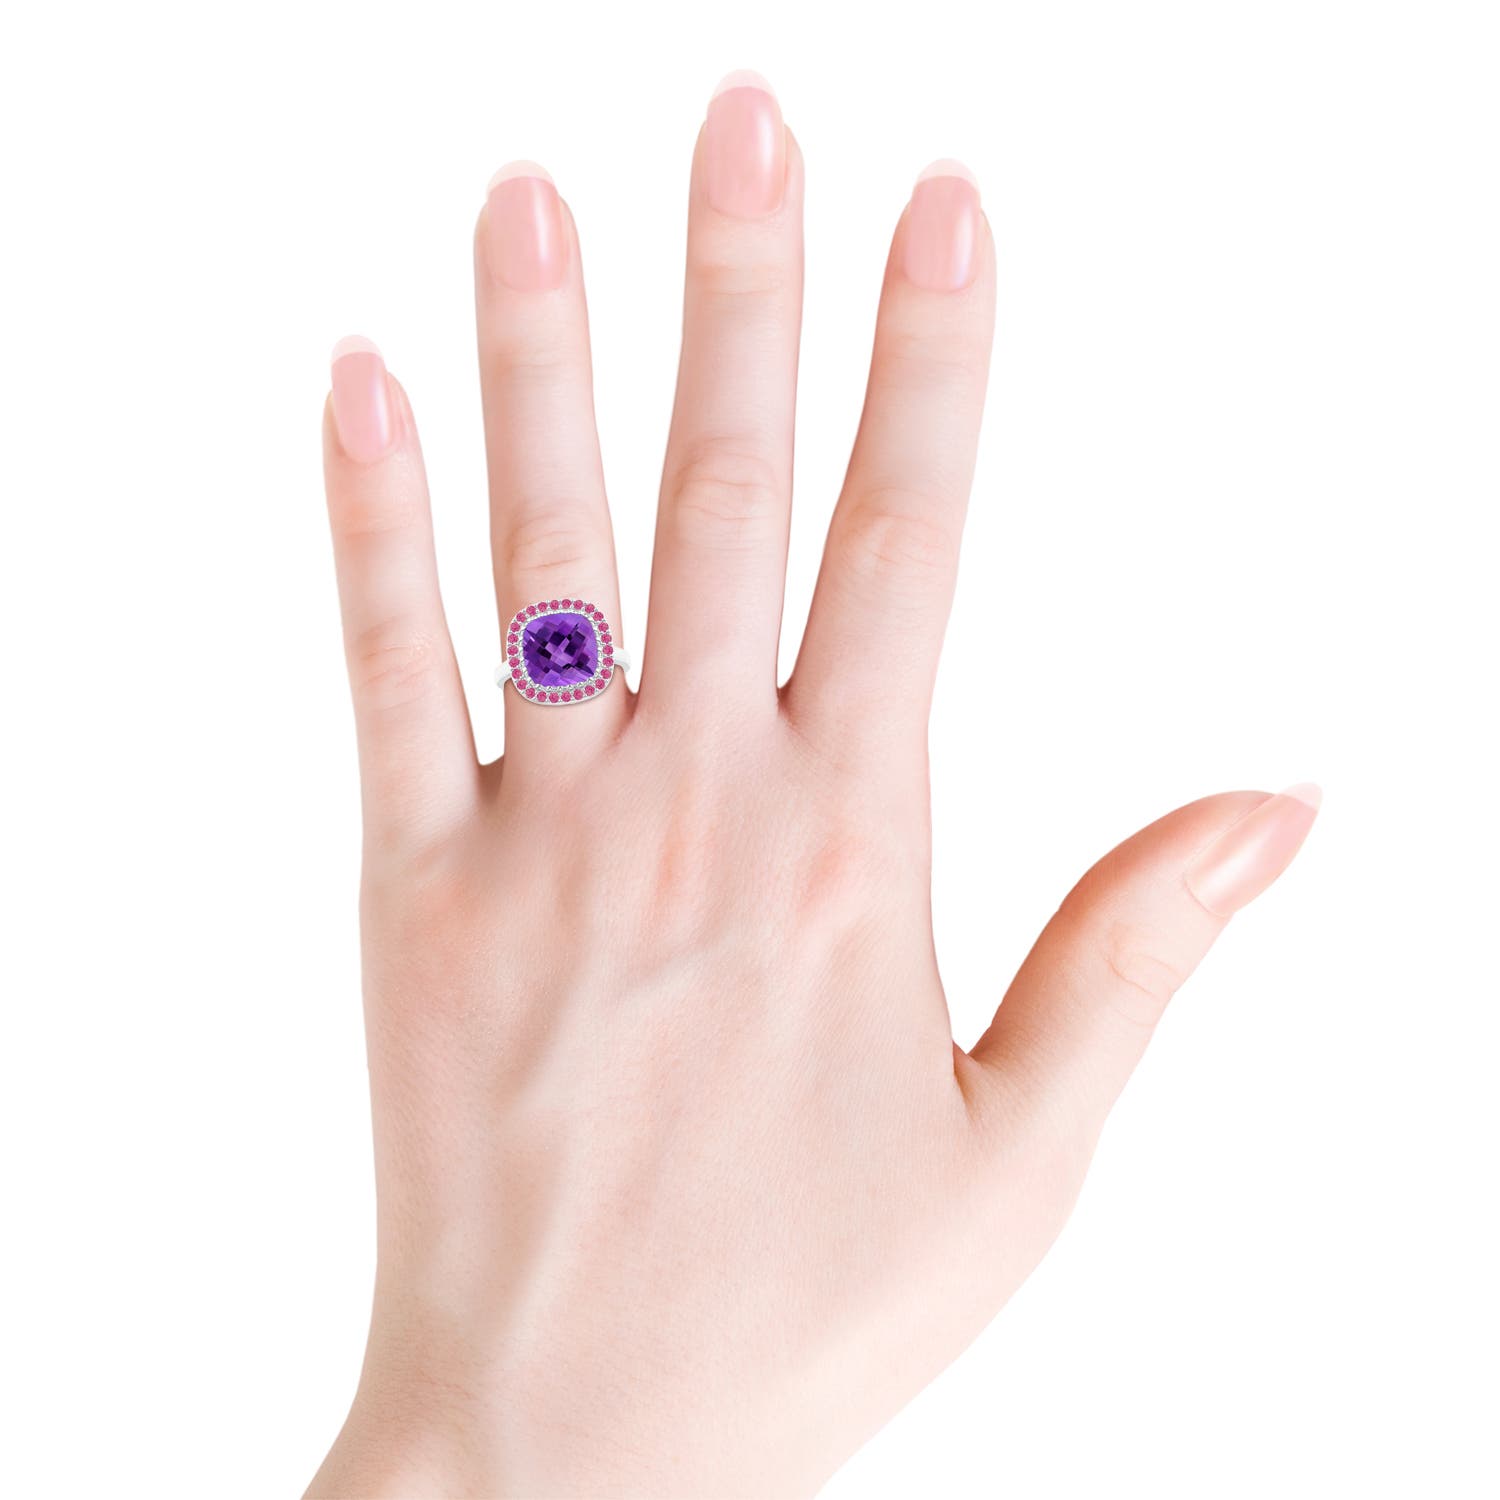 AAA - Amethyst / 4.65 CT / 14 KT White Gold